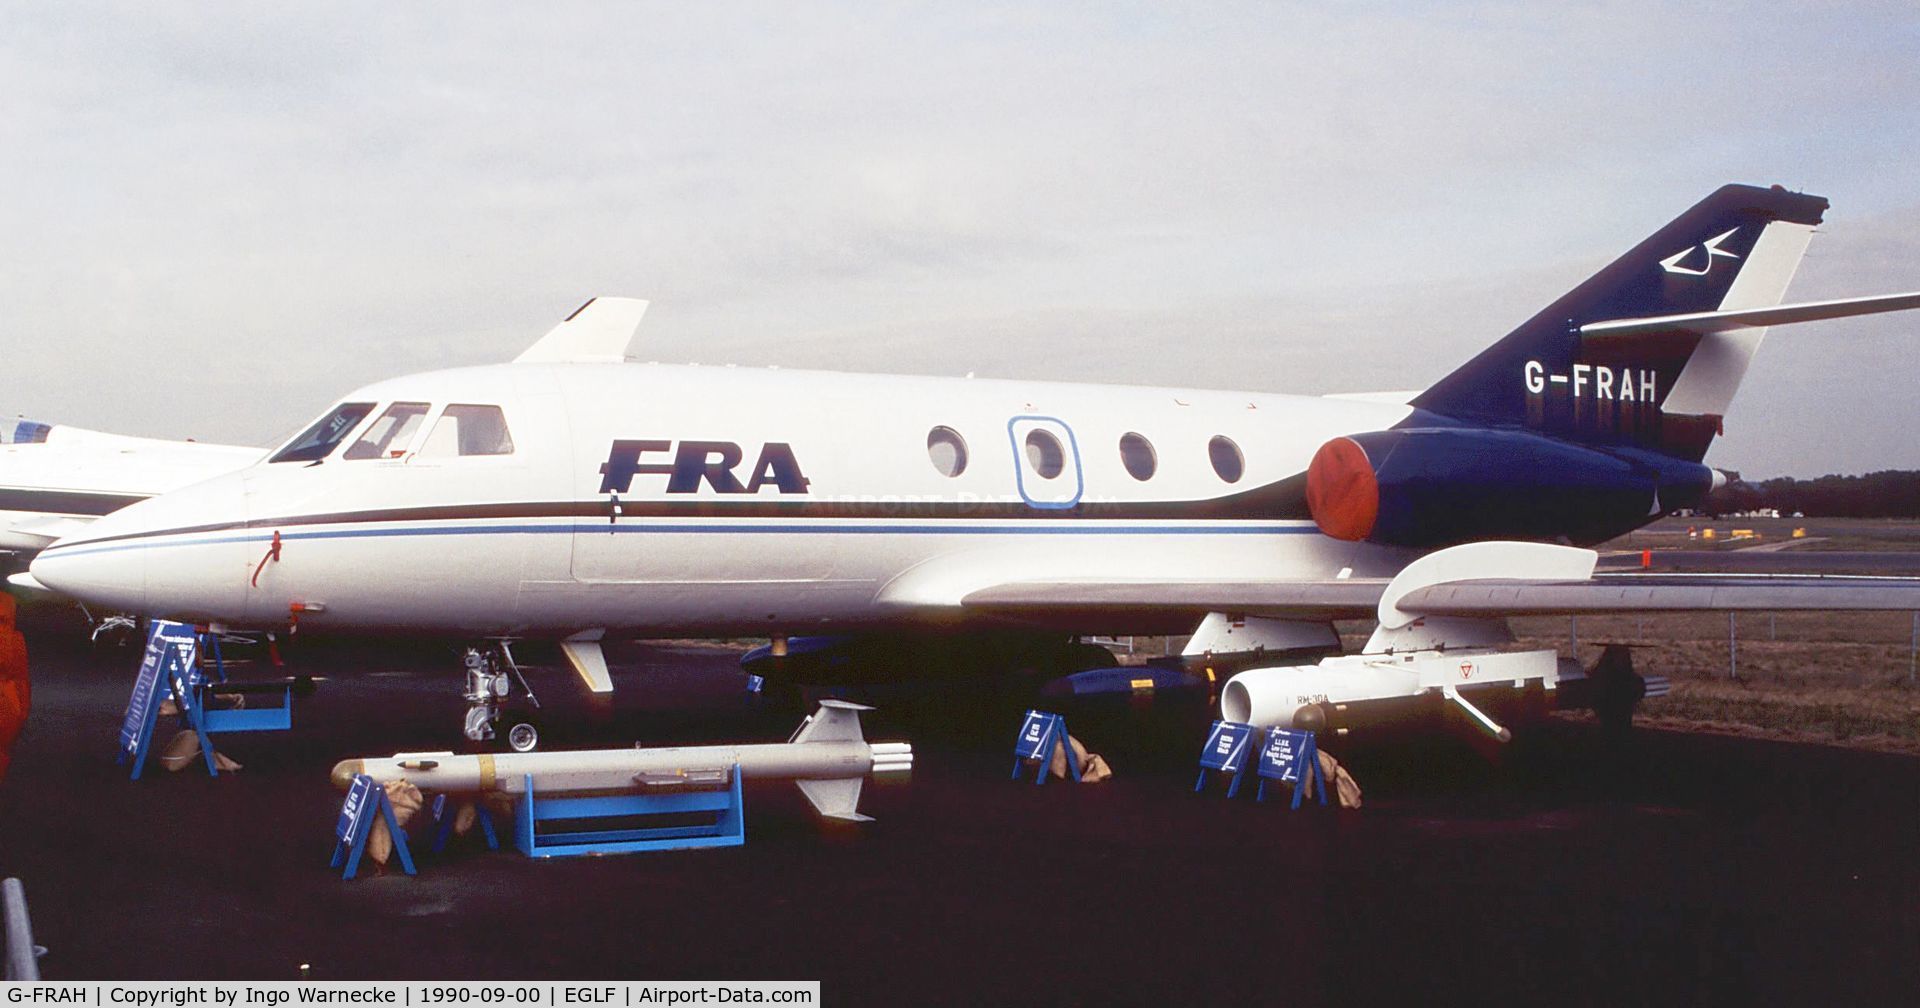 G-FRAH, 1969 Dassault Falcon (Mystere) 20DC C/N 223, Dassault Falcon 20 of FRAviation as high speed taget towing aircraft of FRA at Farnborough International 1990